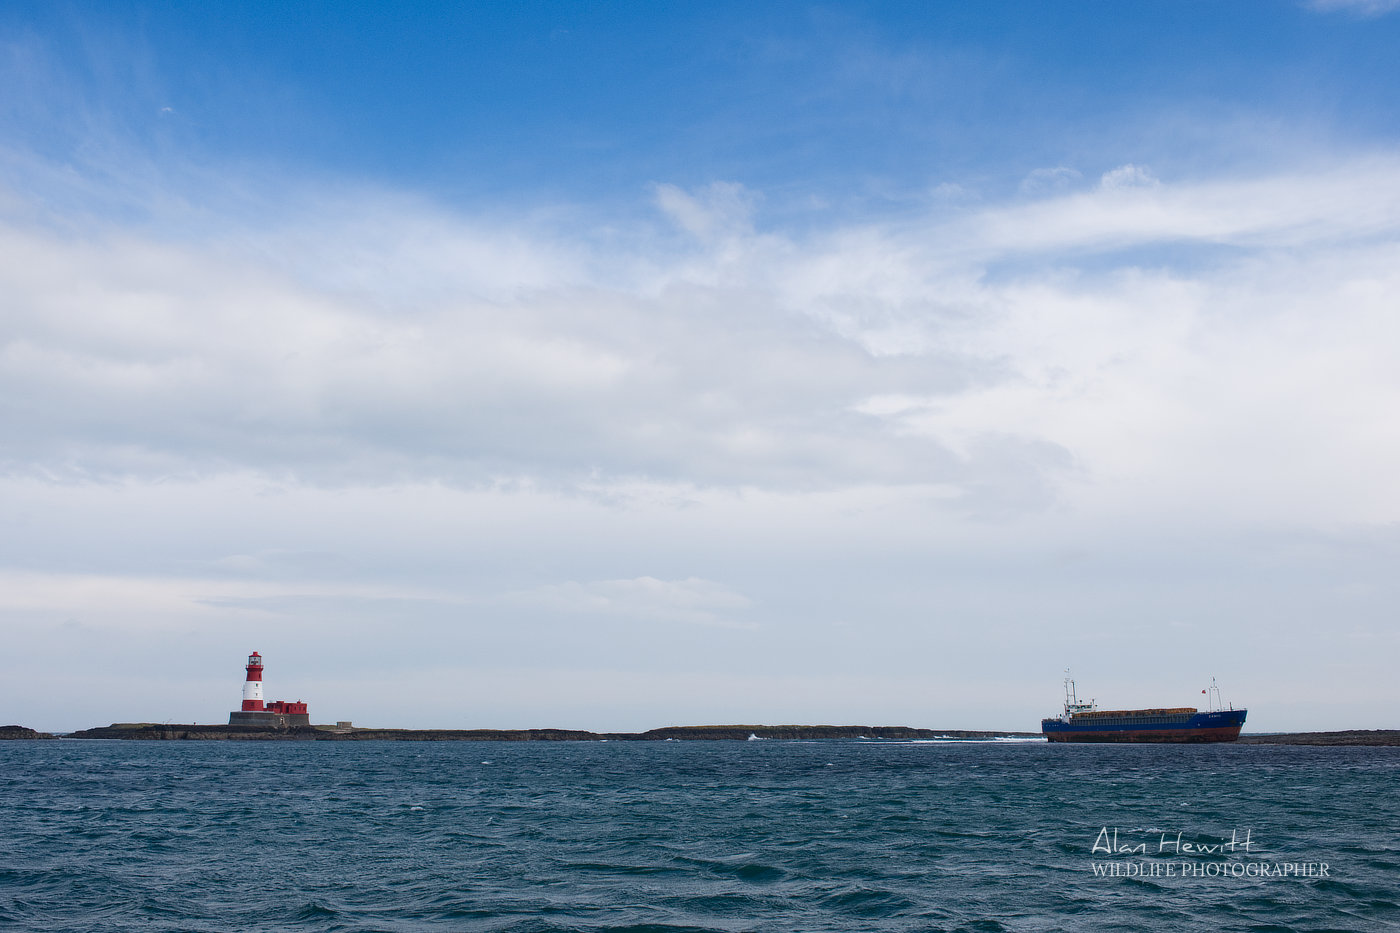 MV Danio Grounded on the Blue Caps with Longstone Lighthouse in proximity, Farne Islands. Alan Hewitt Photography.